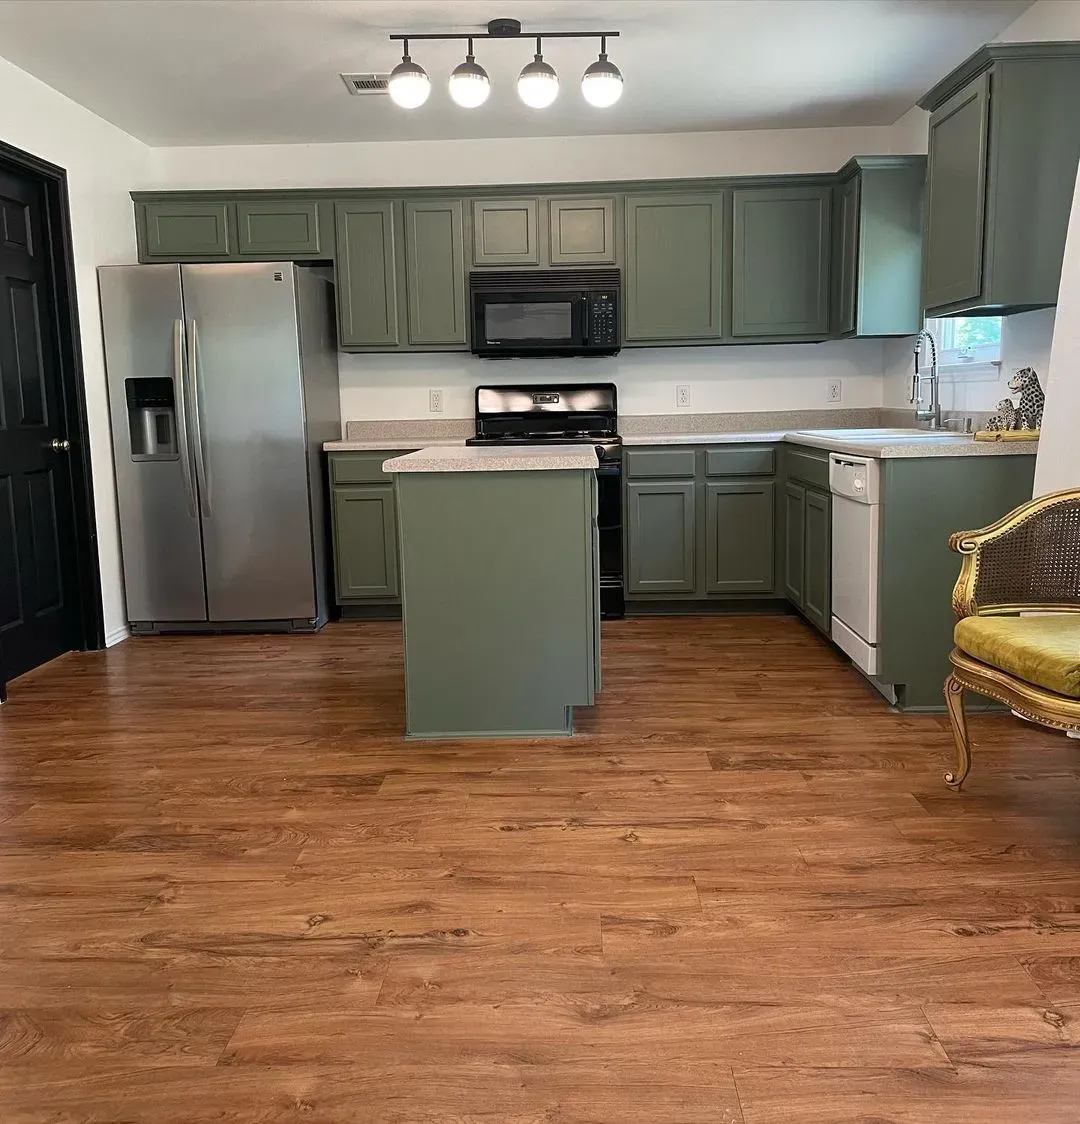 Behr Conifer Green kitchen cabinets color review